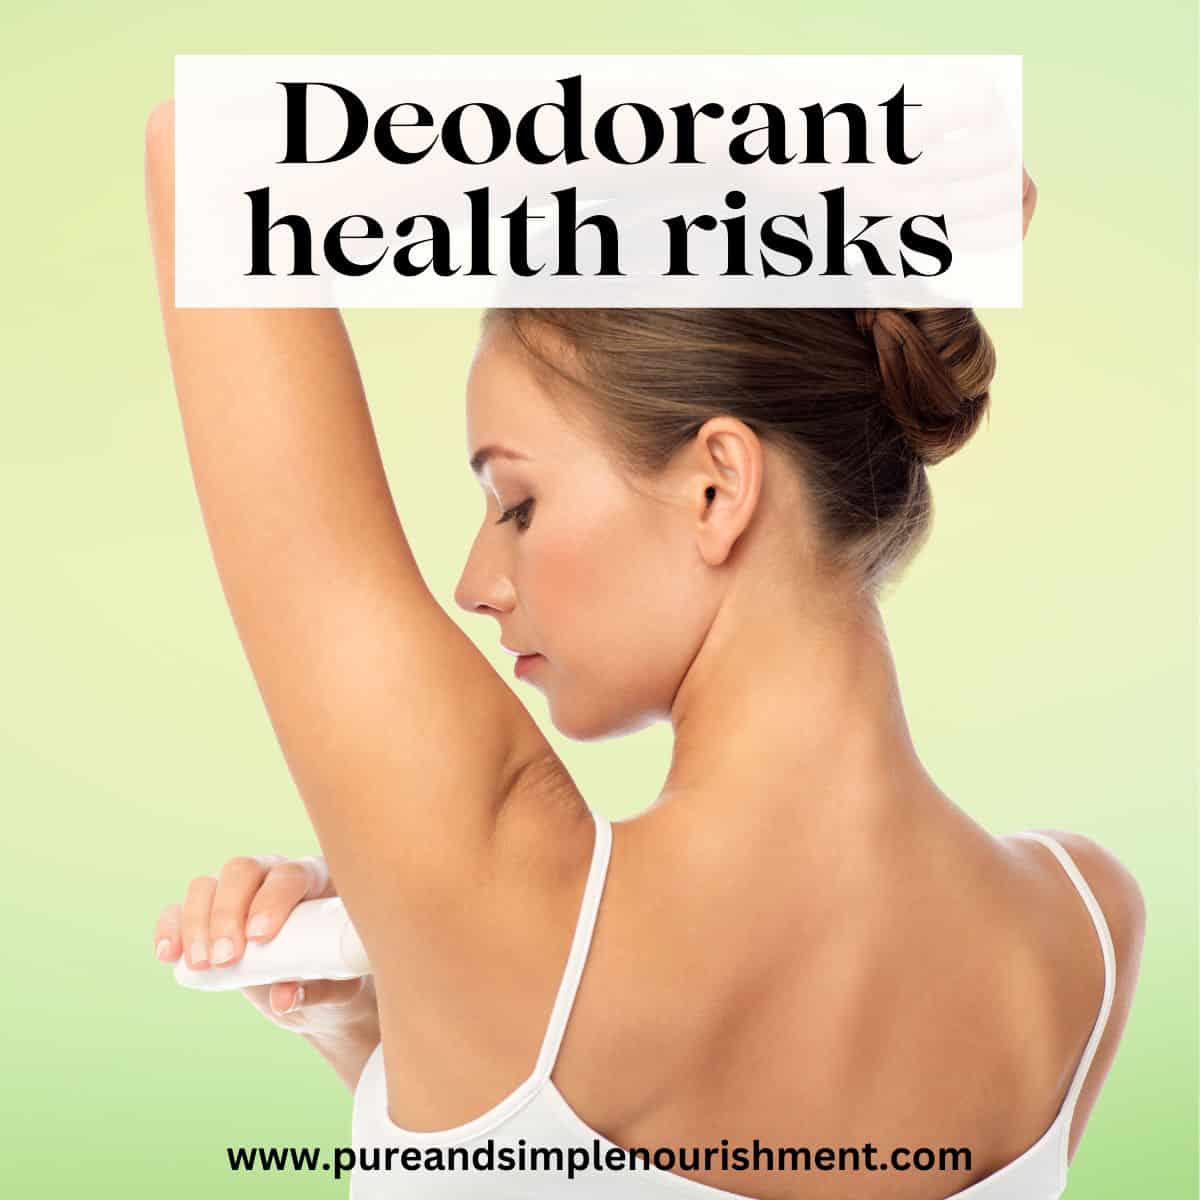 A woman putting on deodorant with the words Deodorant Health Risks above her.